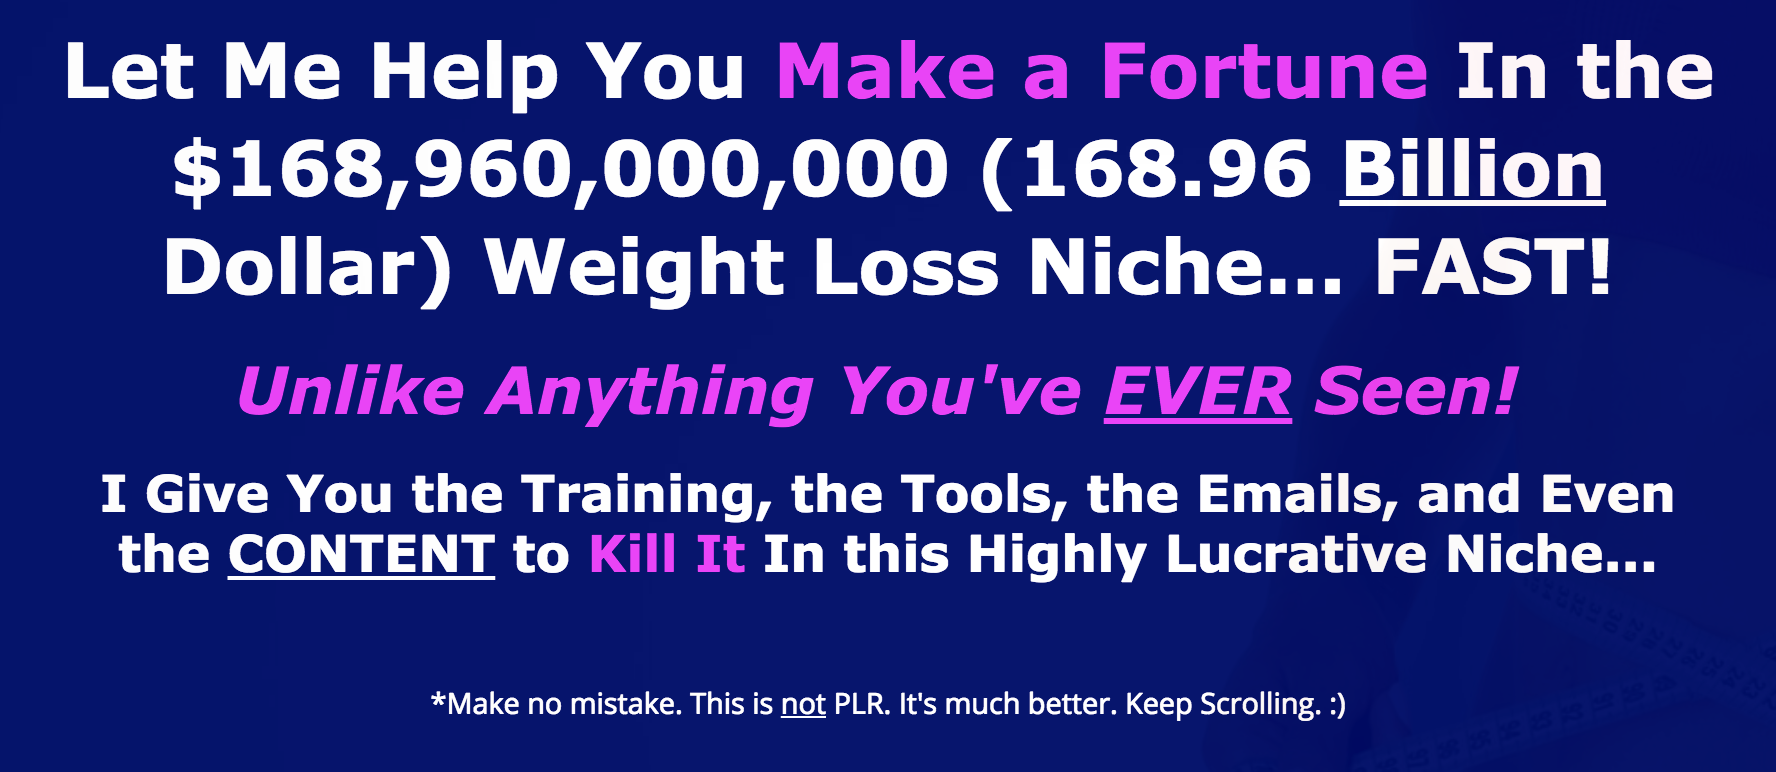 Weight Loss Niche Domination Review